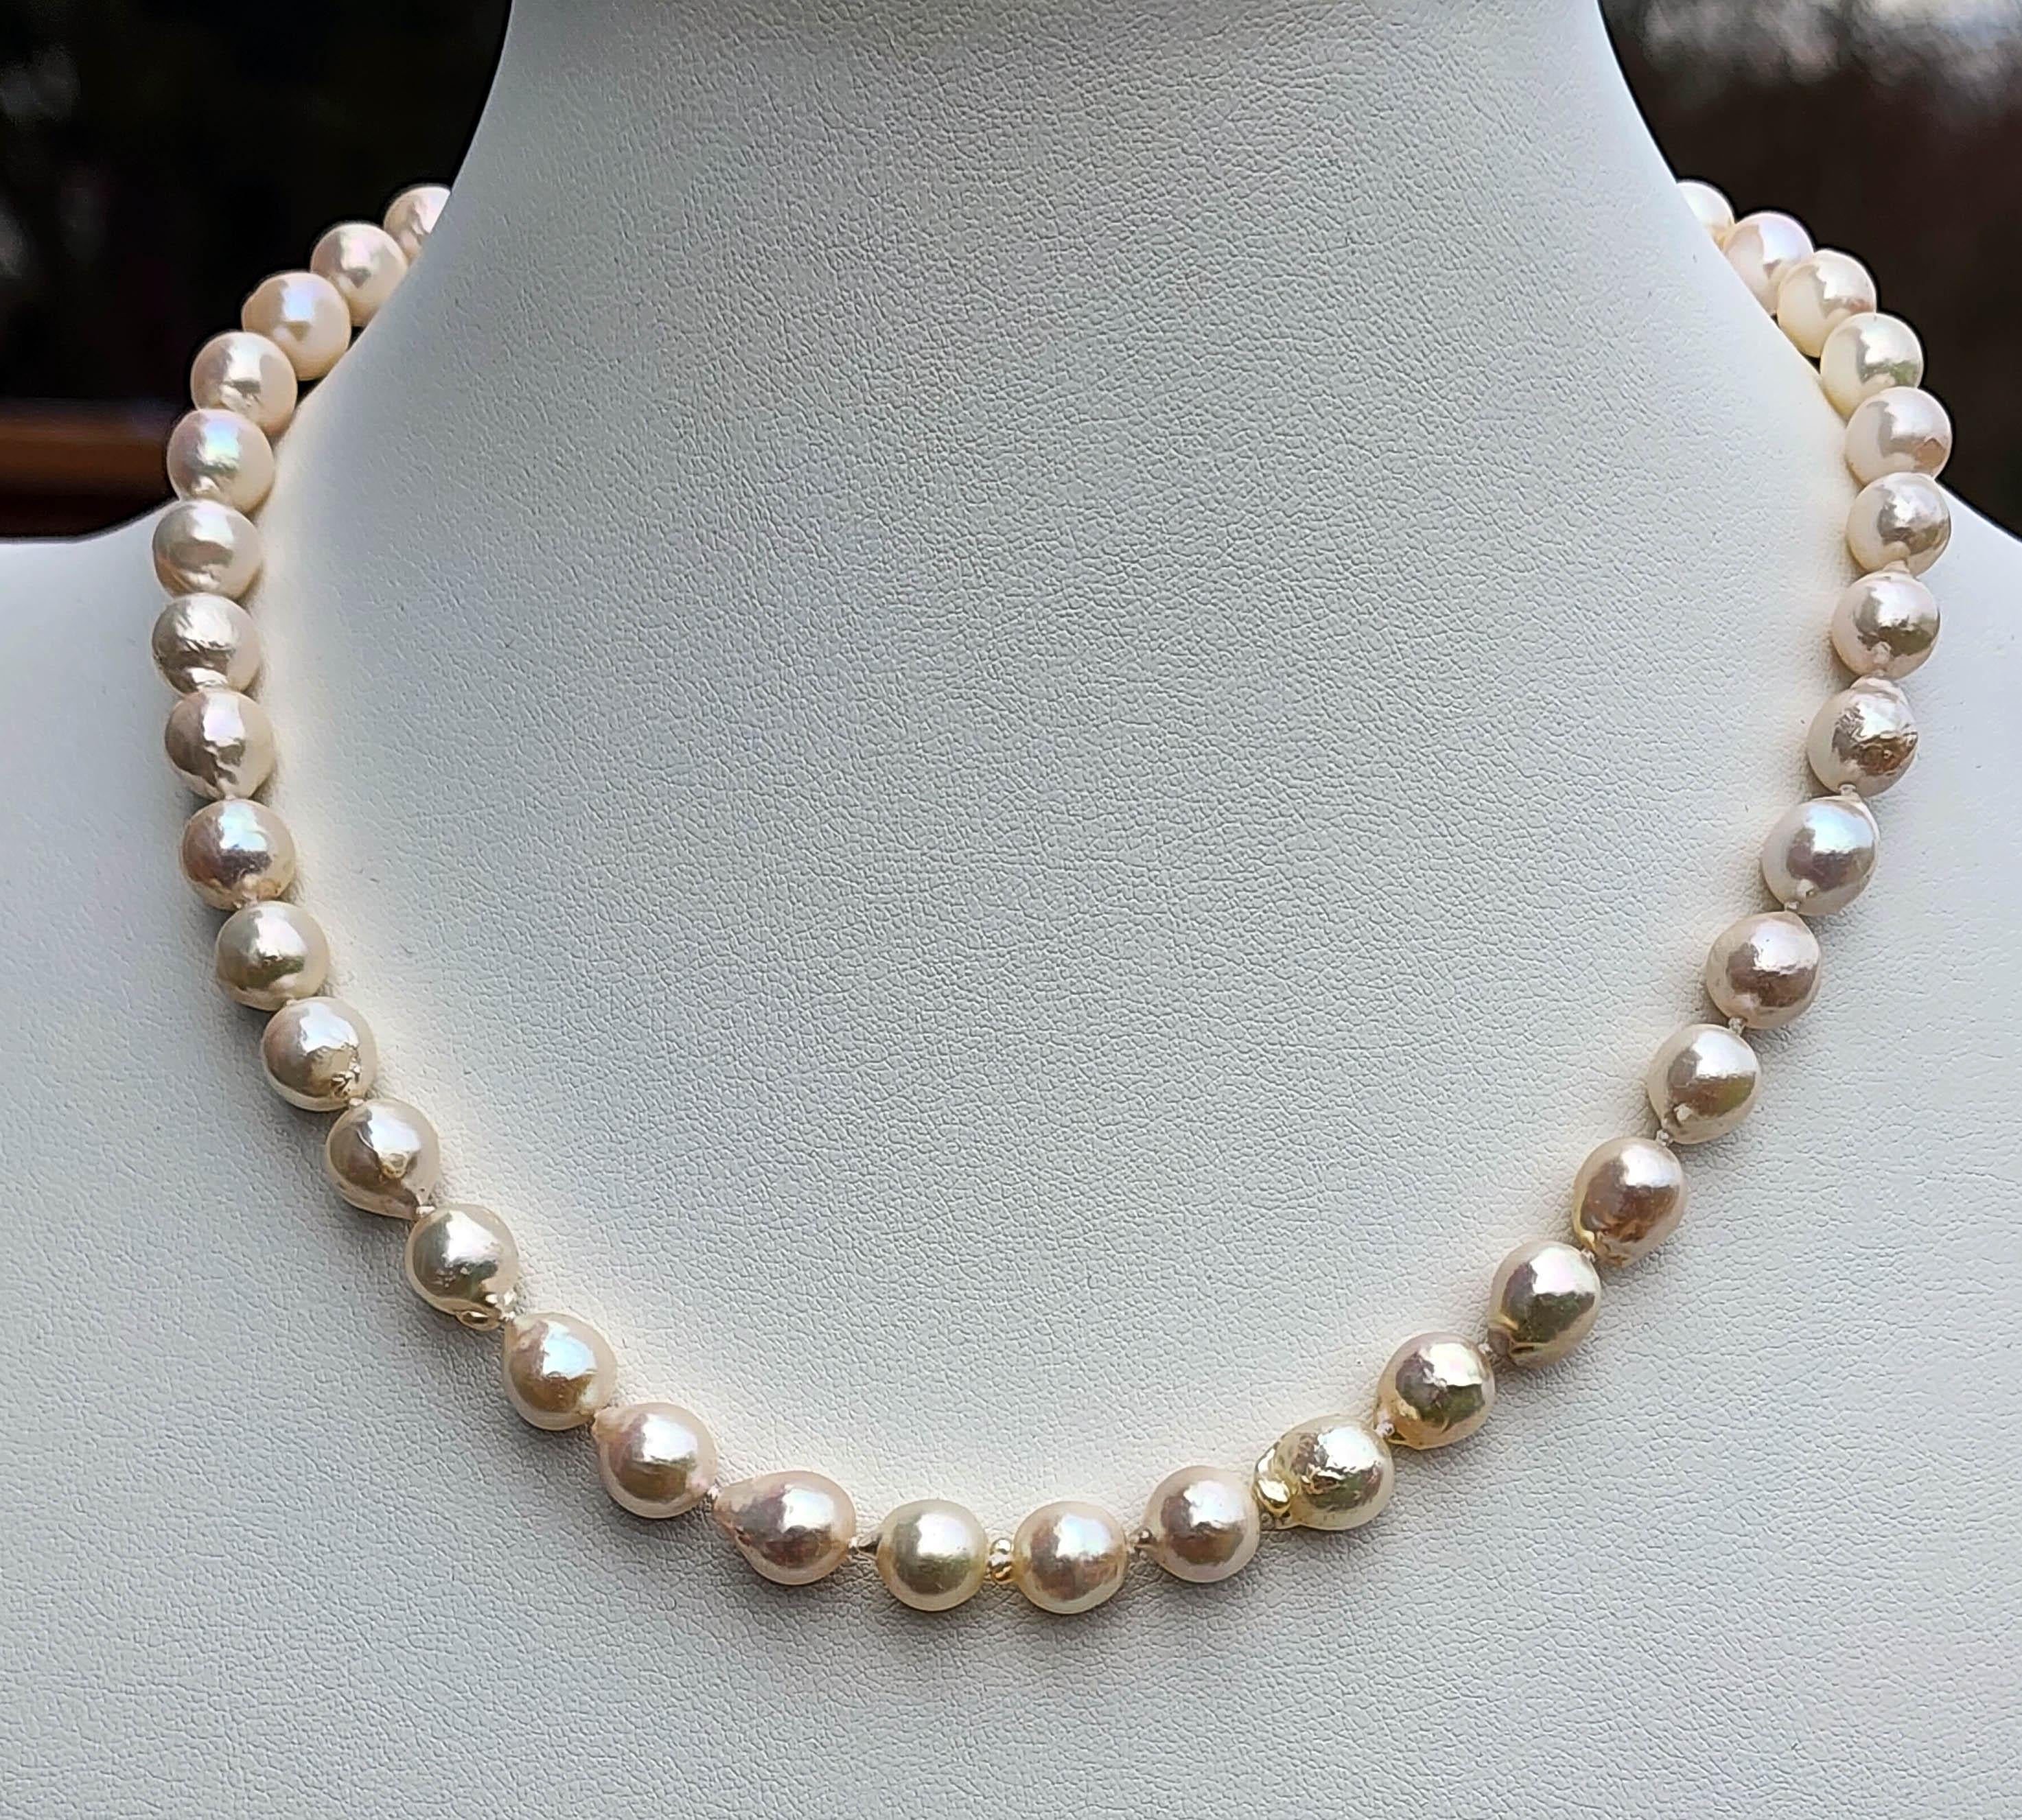 Bead A Pearl Necklace and Bracelet set of Cultured Salt Water Pearls. For Sale